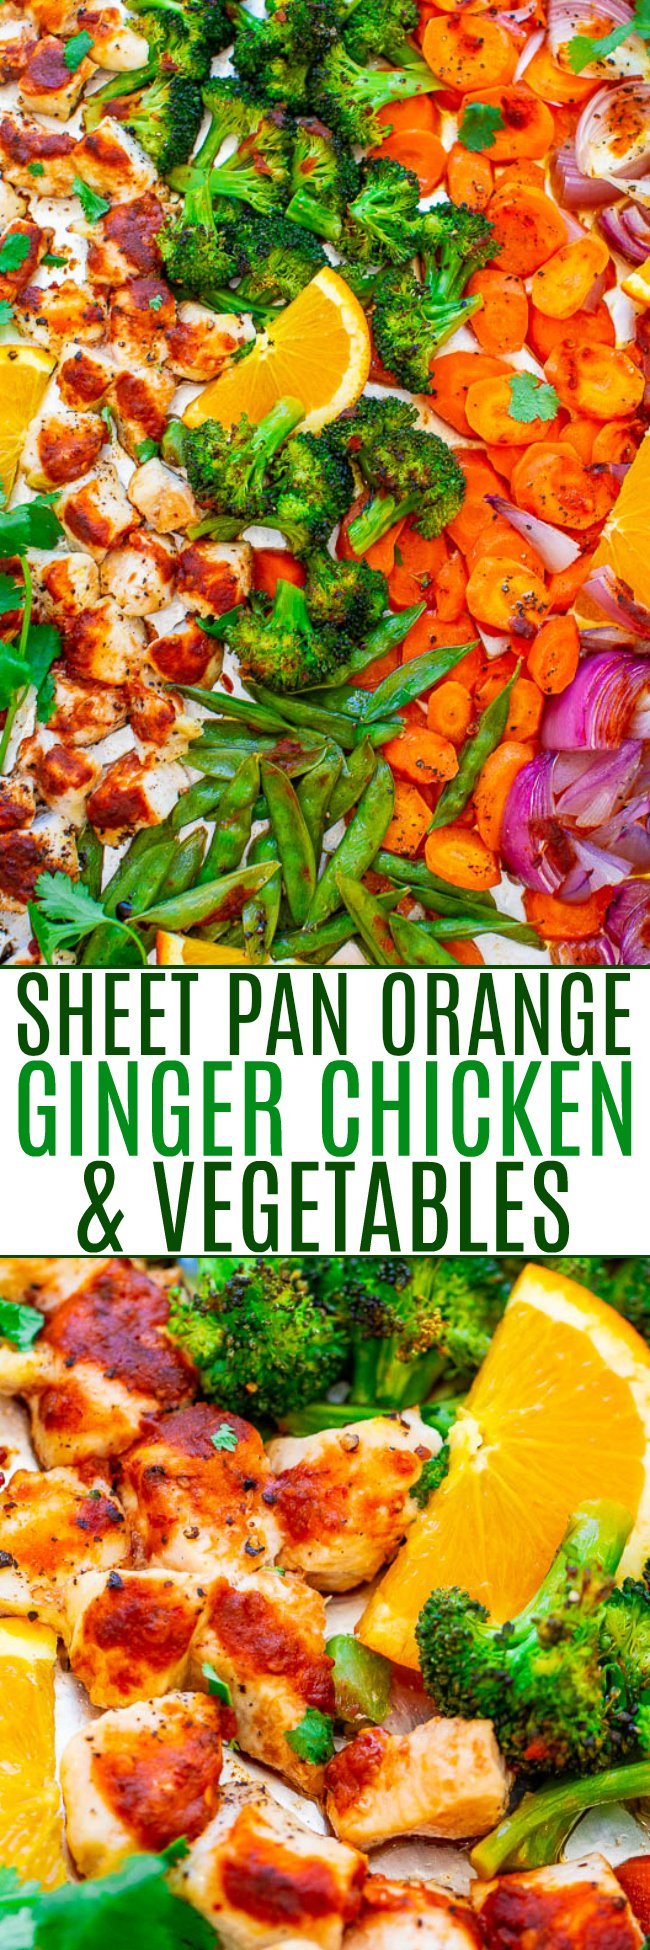 Sheet Pan Orange Ginger Chicken and Vegetables - Fast, EASY, HEALTHY, and loaded with great orange ginger flavor!! A DELISH one-pan meal with zero cleanup that’s perfect for busy weeknights!!